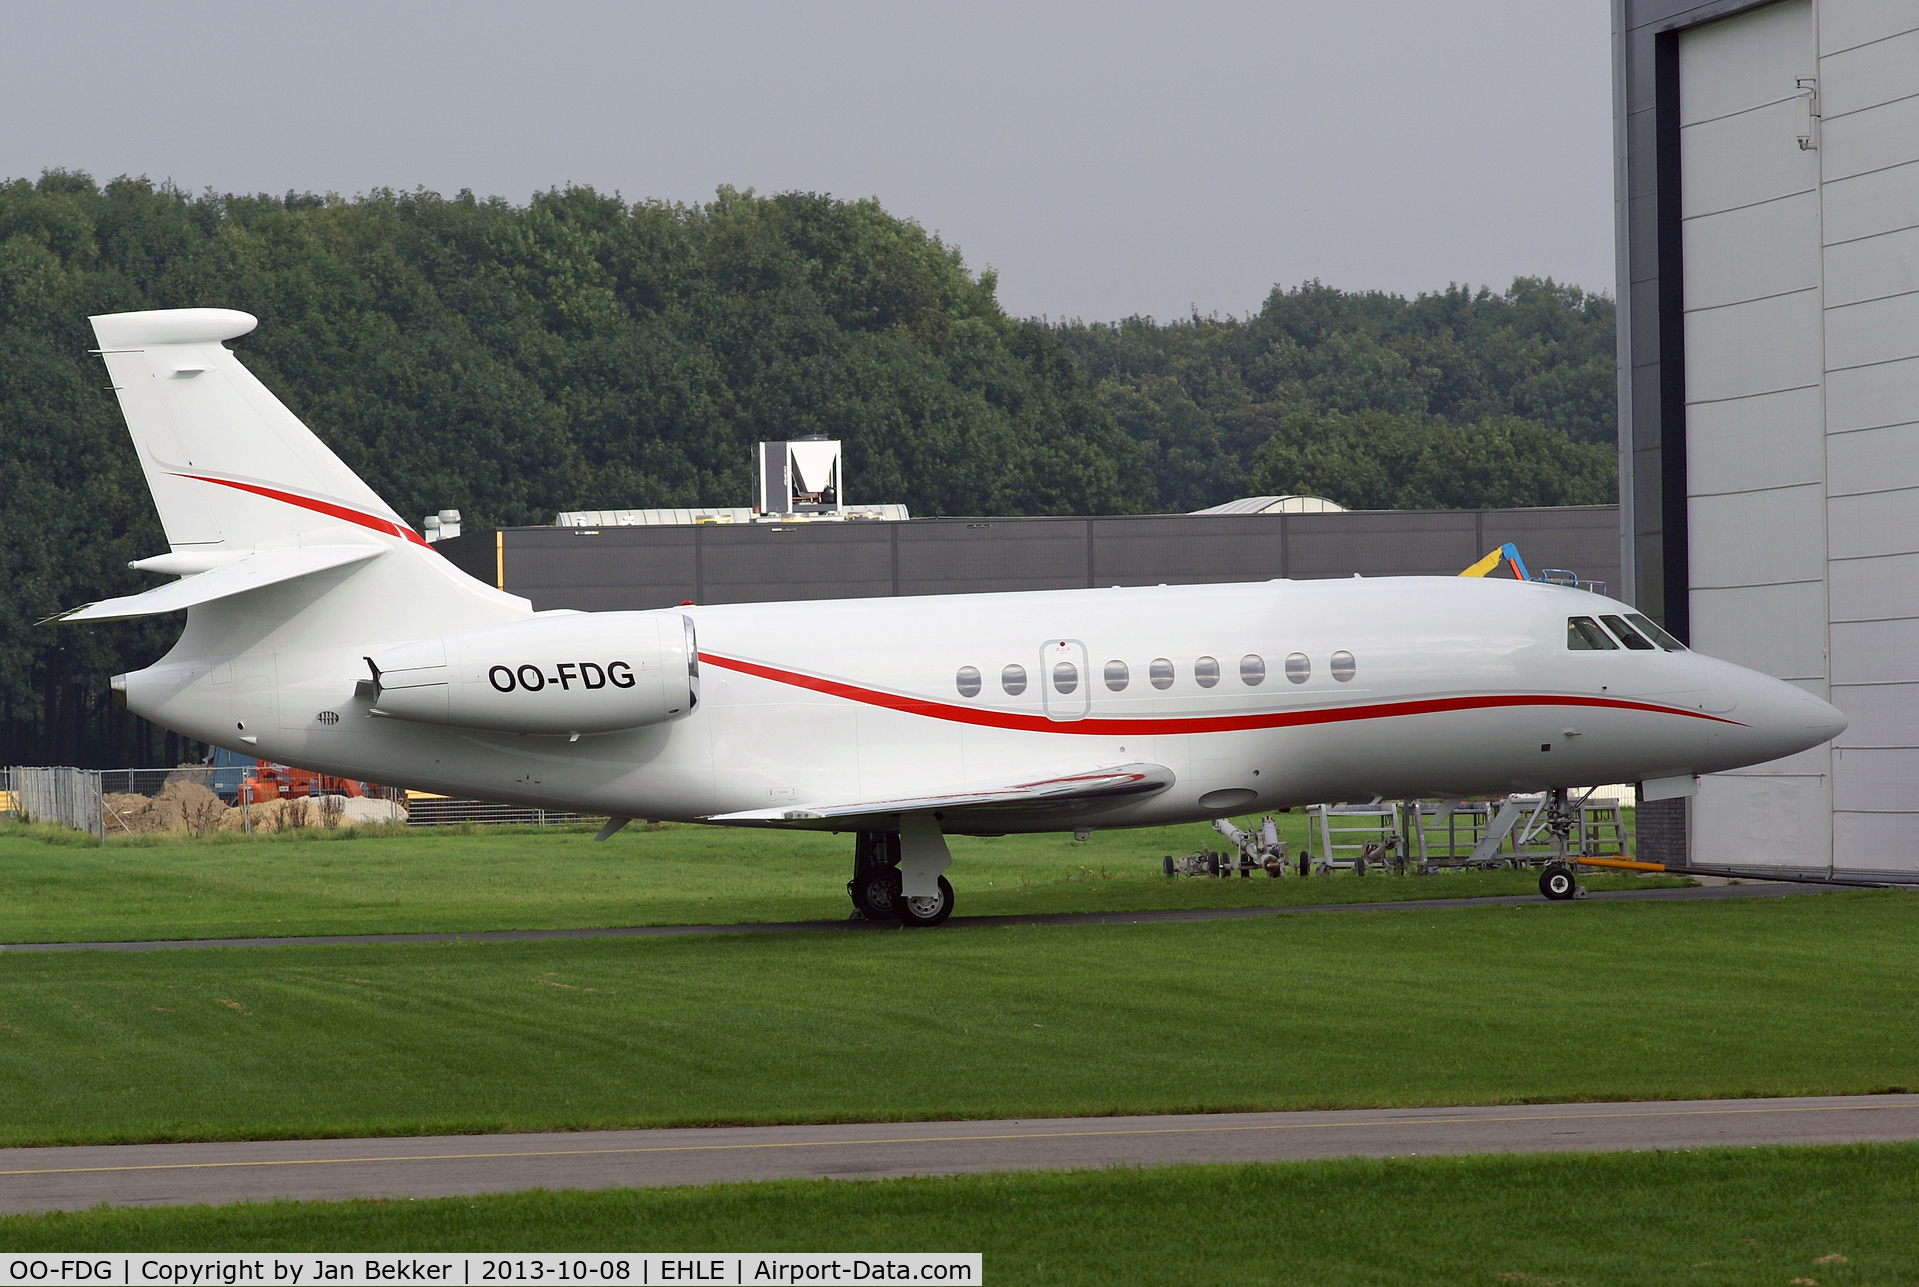 OO-FDG, 2006 Dassault Falcon 2000EX C/N 61, Lelystad Airport in front of QAPS (for a repaint?) c/n 061